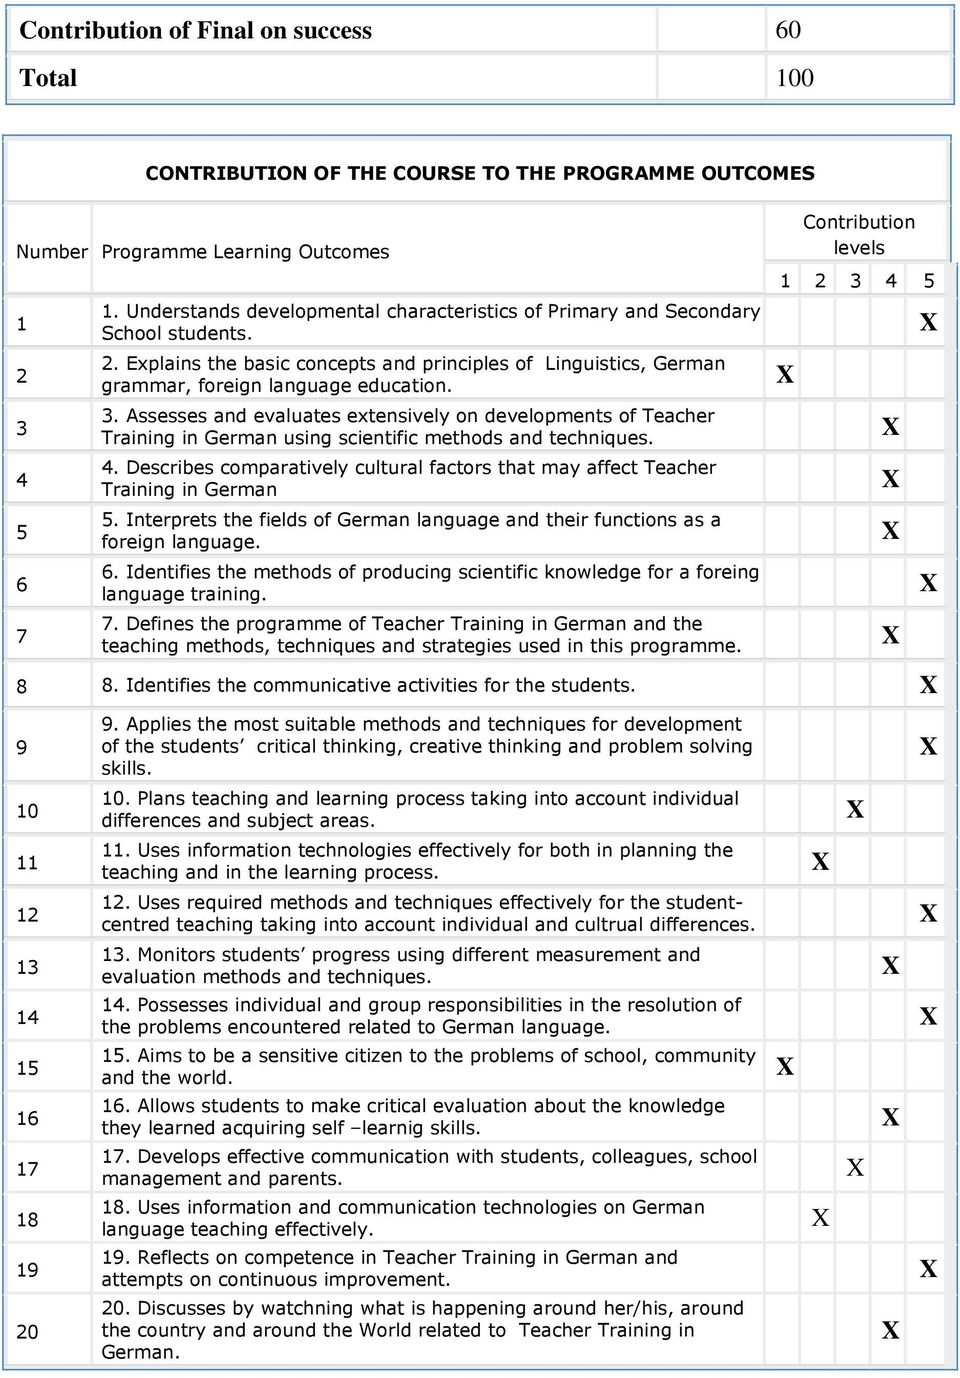 Assesses and evaluates extensively on developments of Teacher Training in German using scientific methods and techniques. 4.